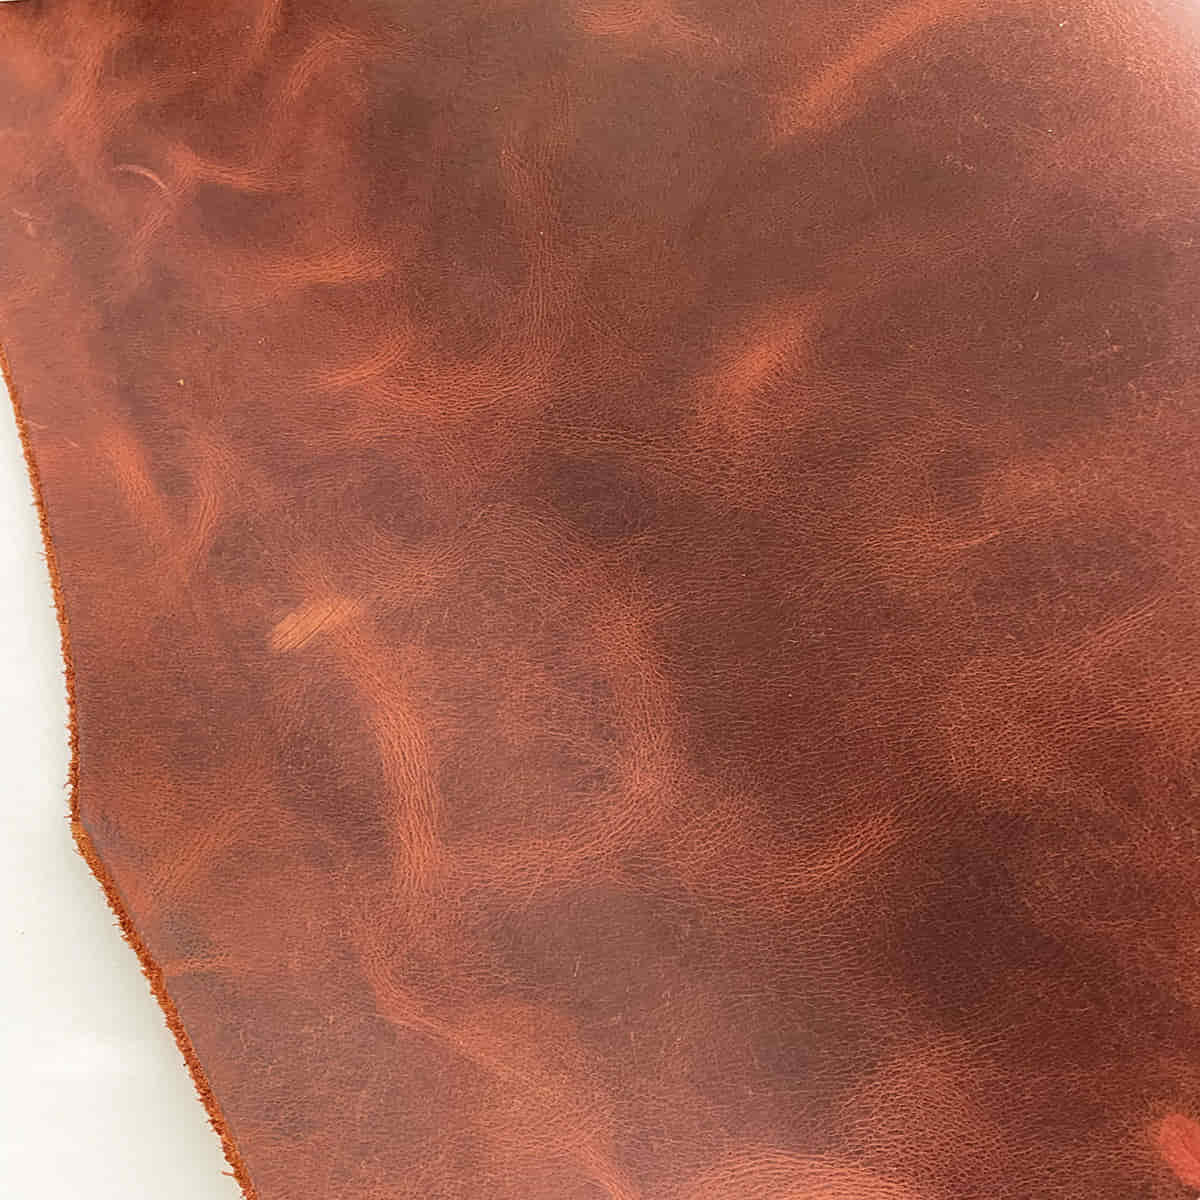 Monument Cognac - Brown Leather Upholstery Fabric 